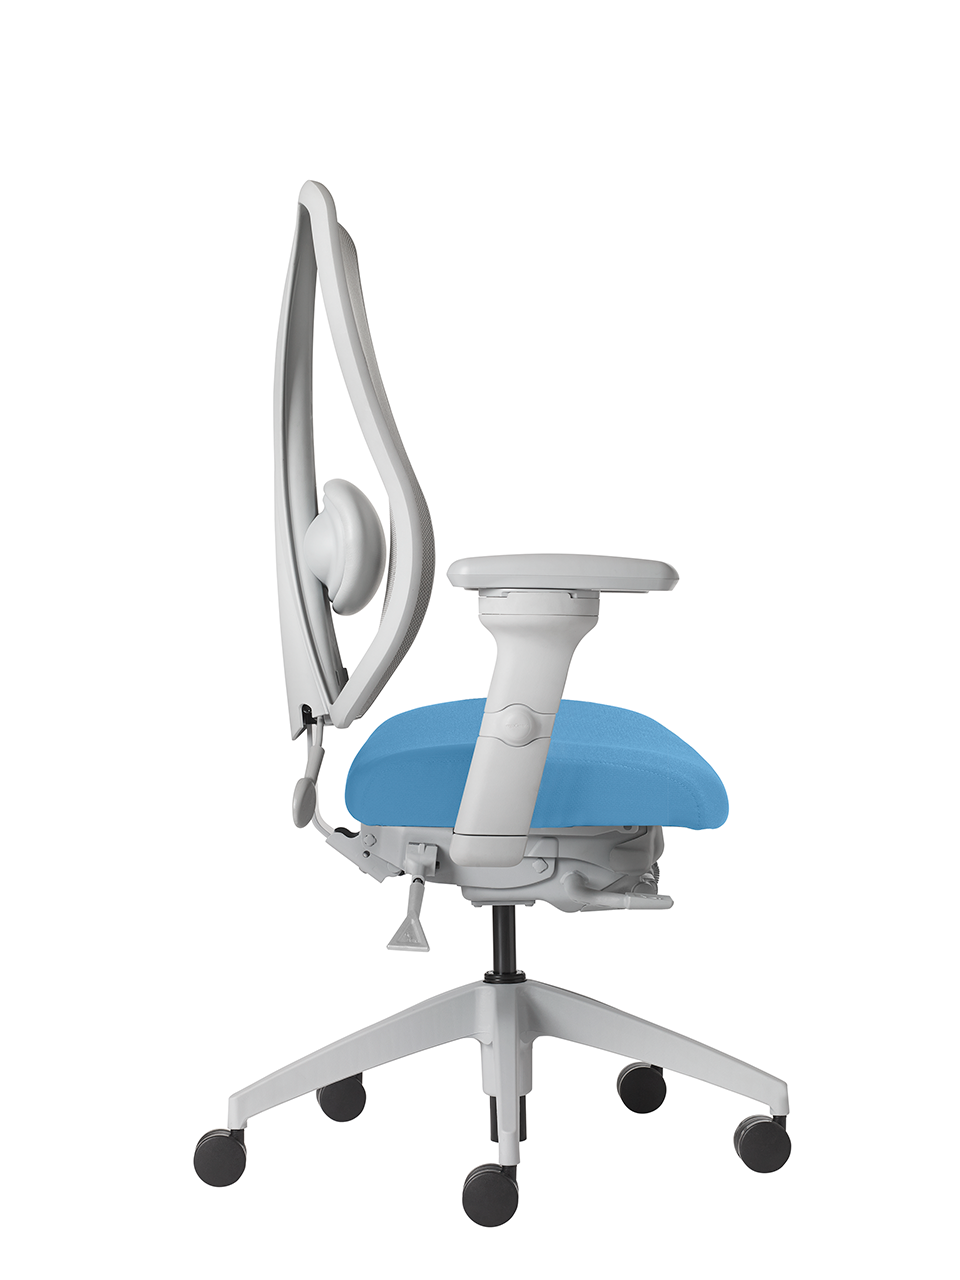 tCentric Hybrid with Foam and Fabric Seat - Light Grey